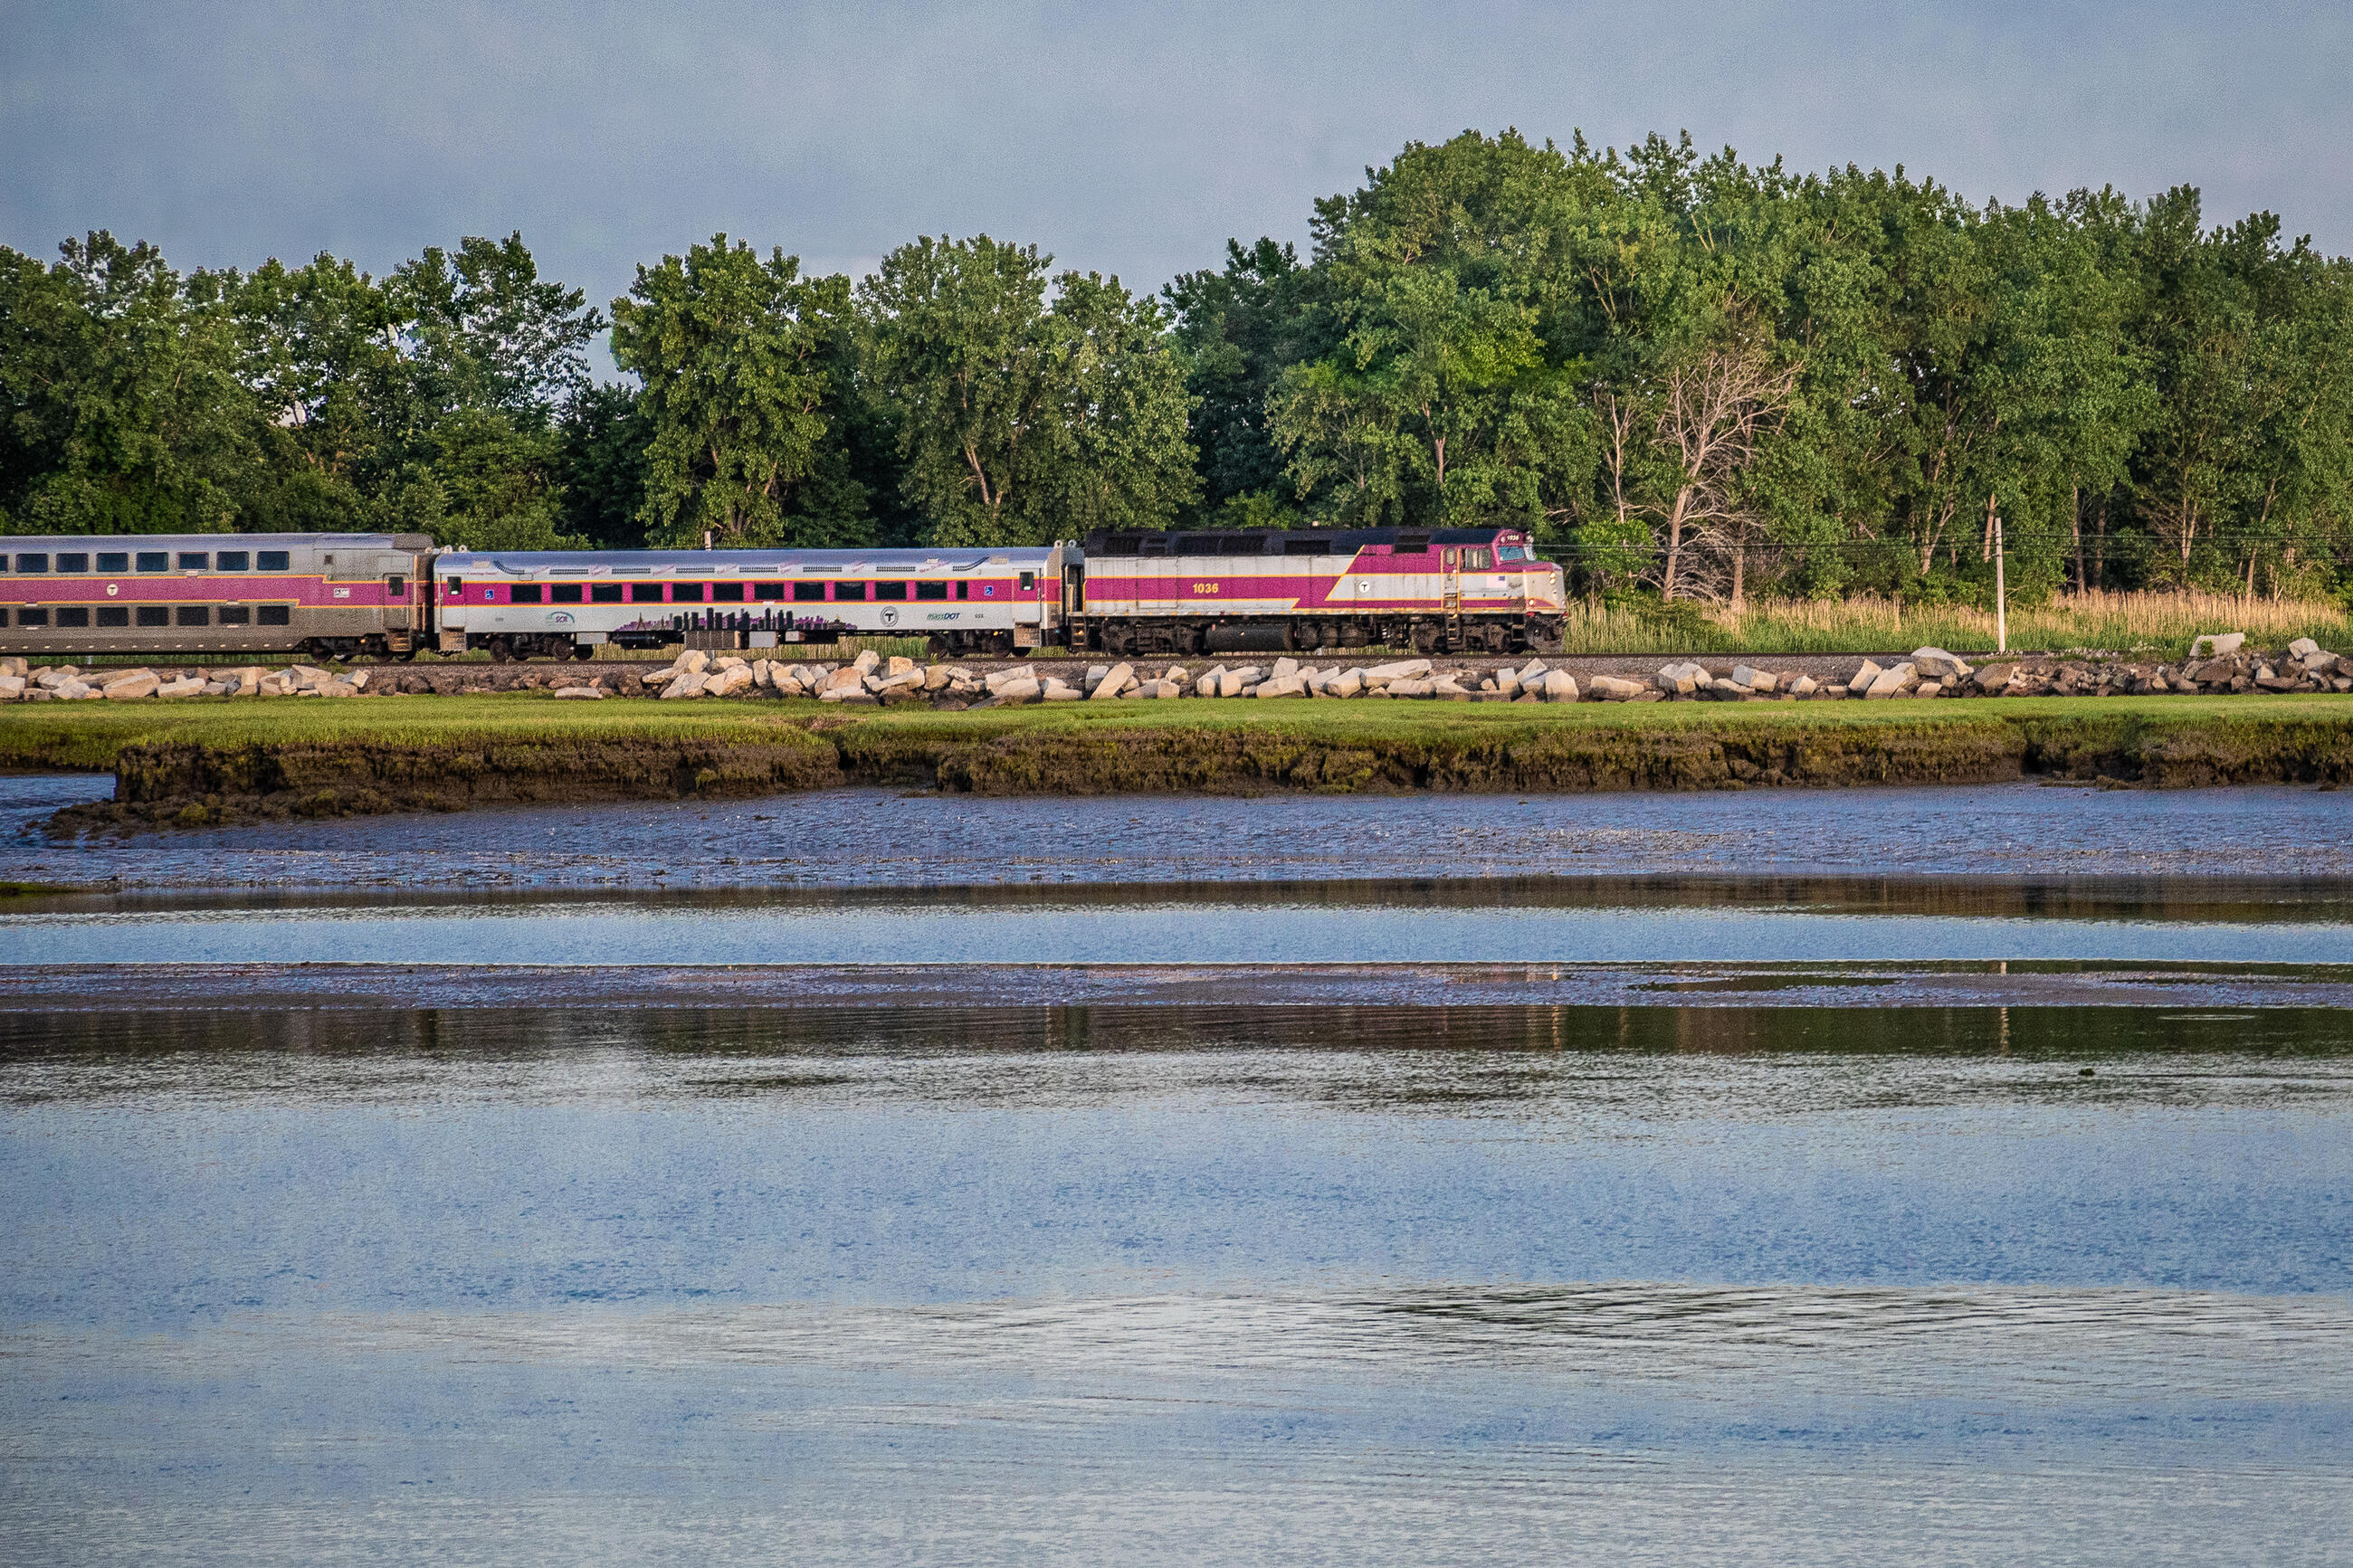 Commuter Rail passing by wetlands and waterways